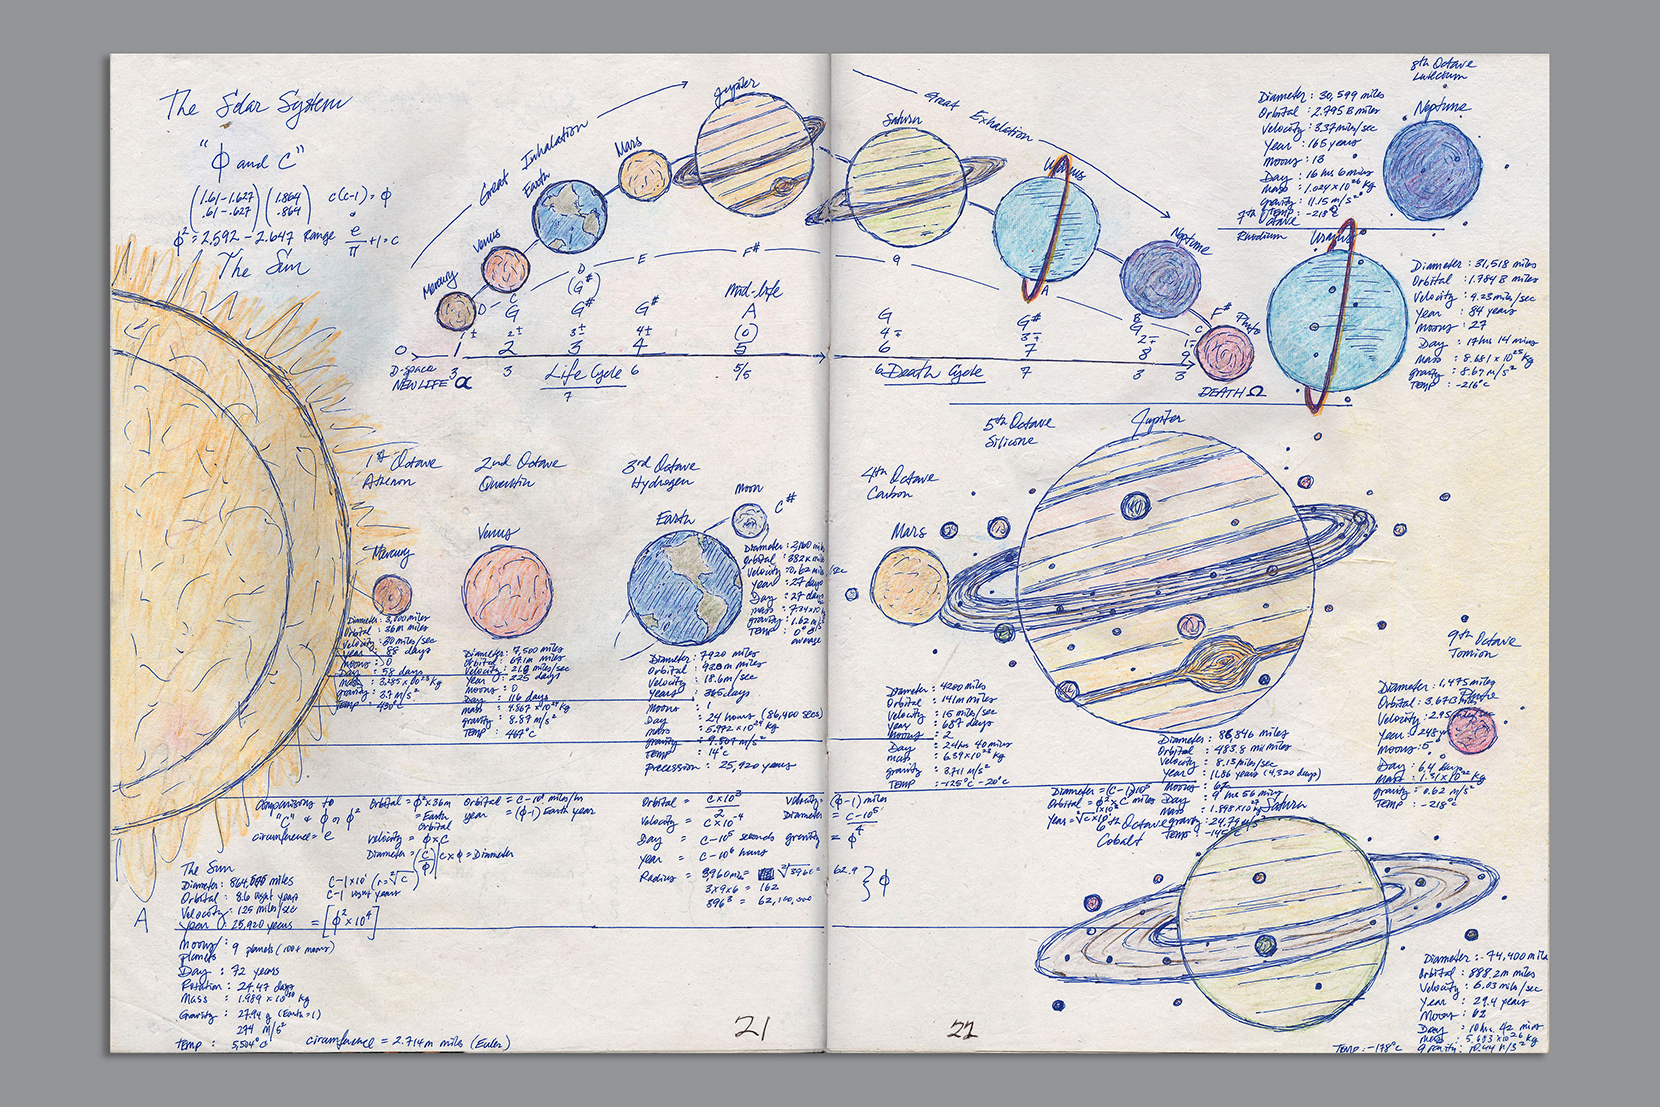 Robert Edward Grant drawing of the Planets